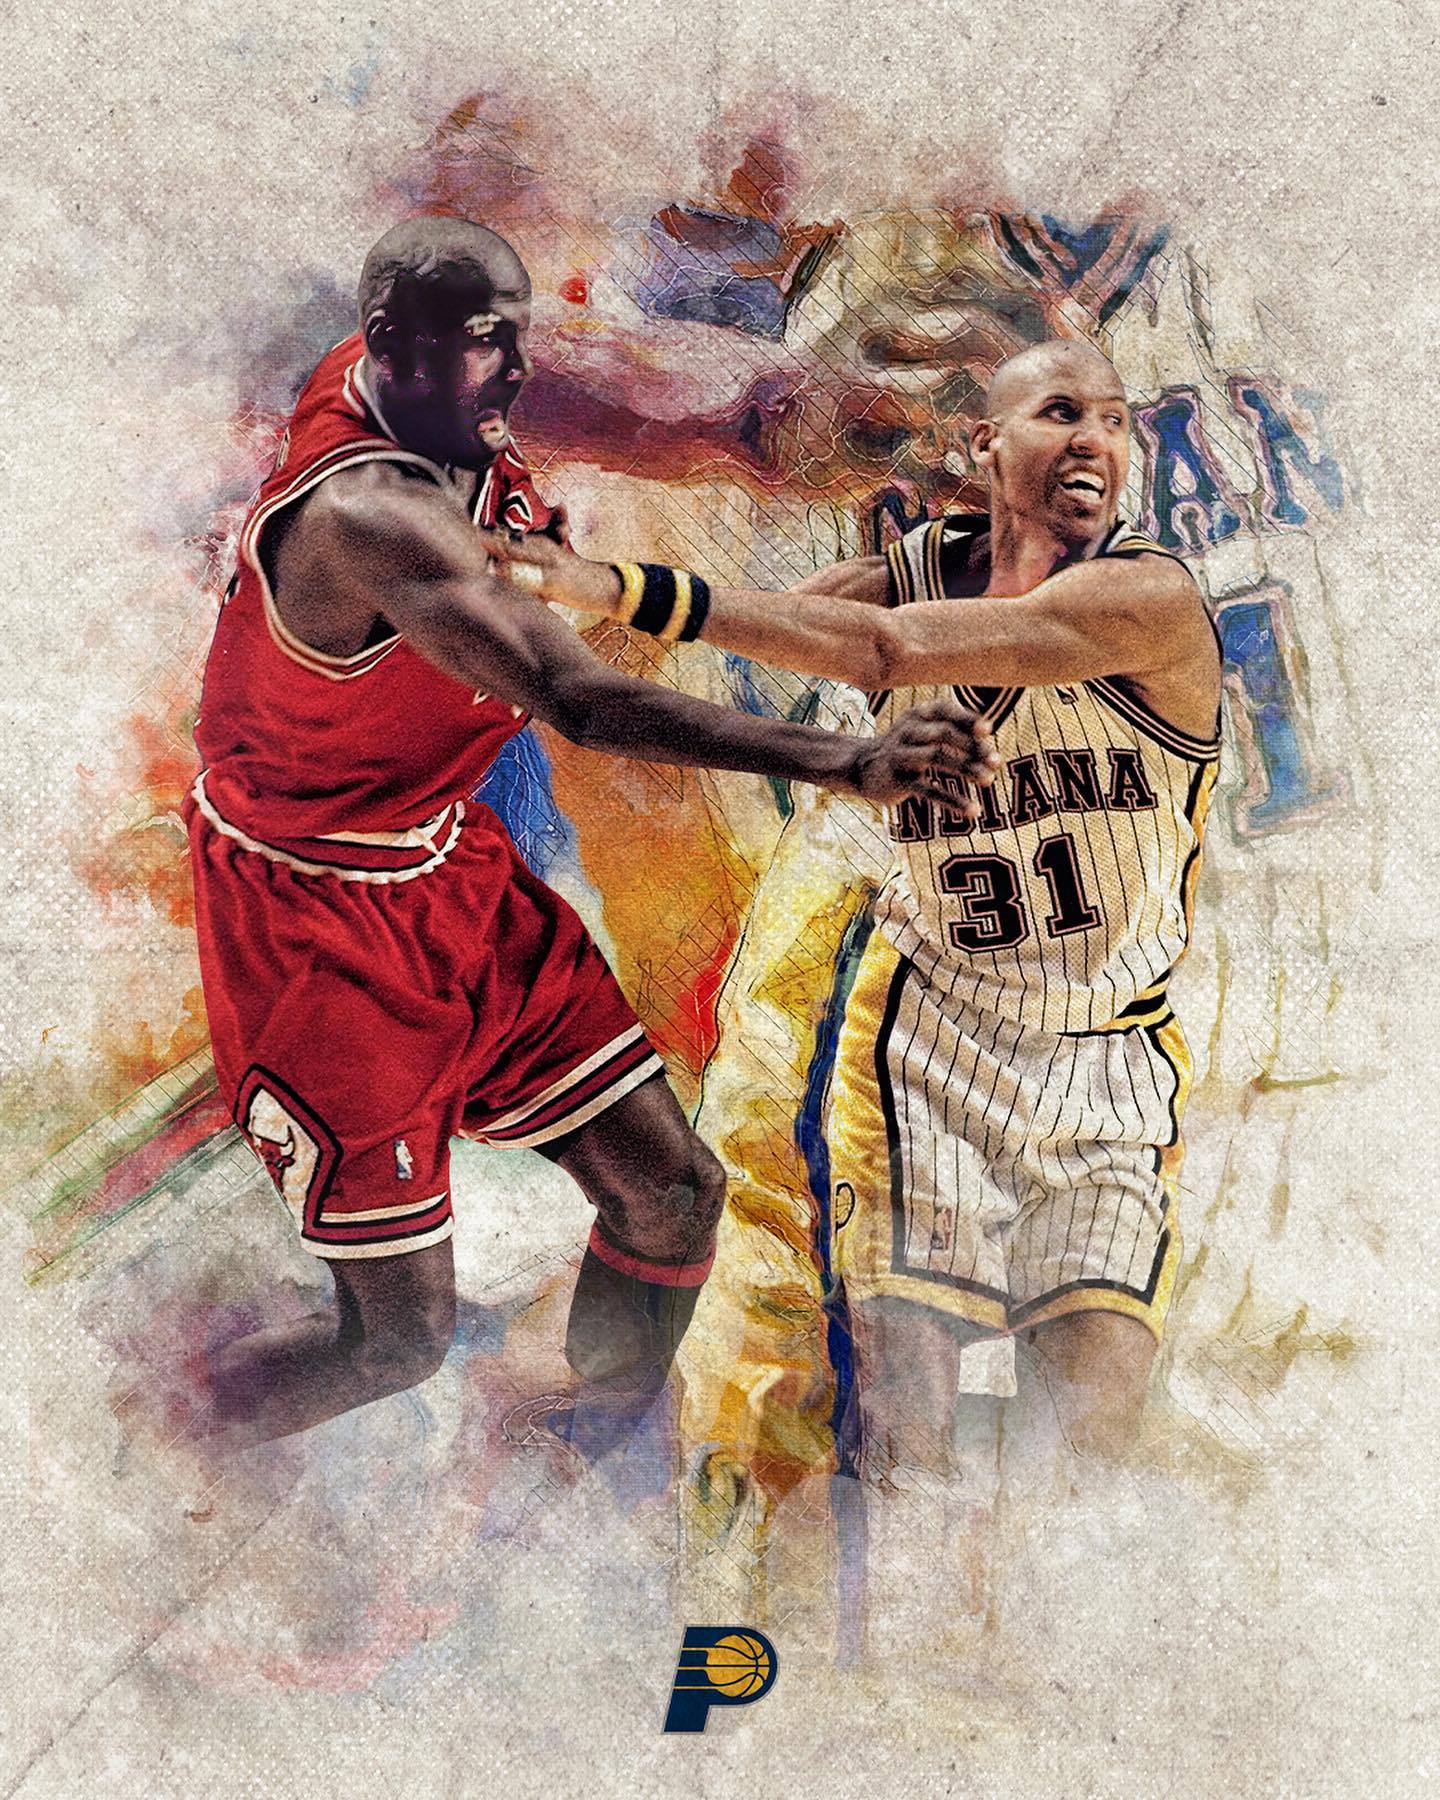 THE SHOT. THE CELEBRATION.  24 years ago today, @reggiemillertnt hit an iconic ...